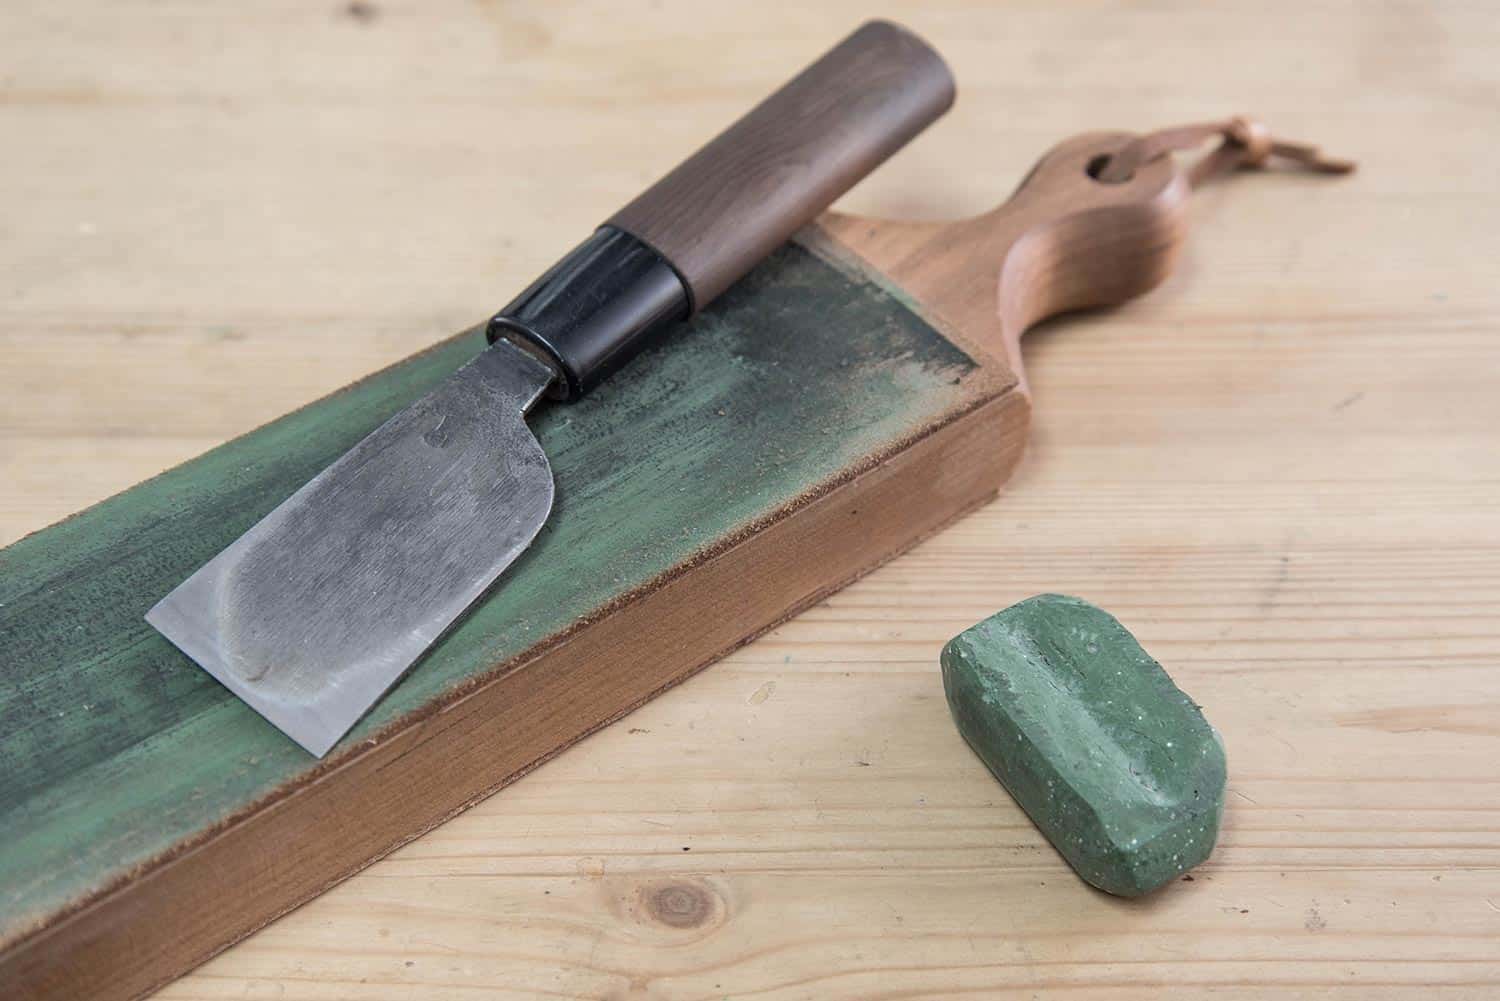 Japanese leather craft knife on a leather knife strop with green polishing compound on a wooden surface